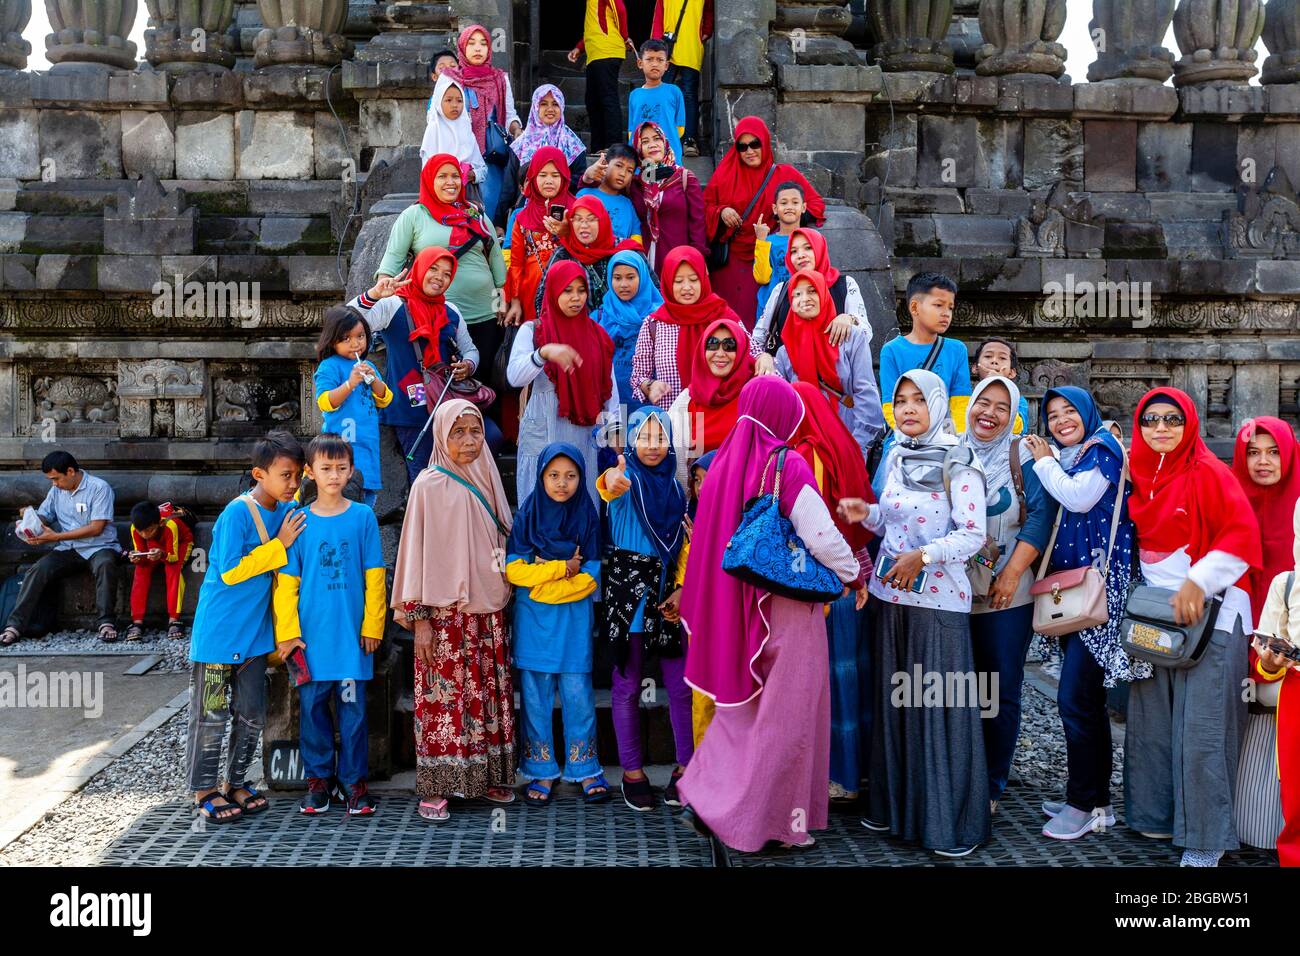 A Group Of Indonesian Visitors At The Prambanan Temple Compounds, Yogyakarta, Central Java, Indonesia. Stock Photo